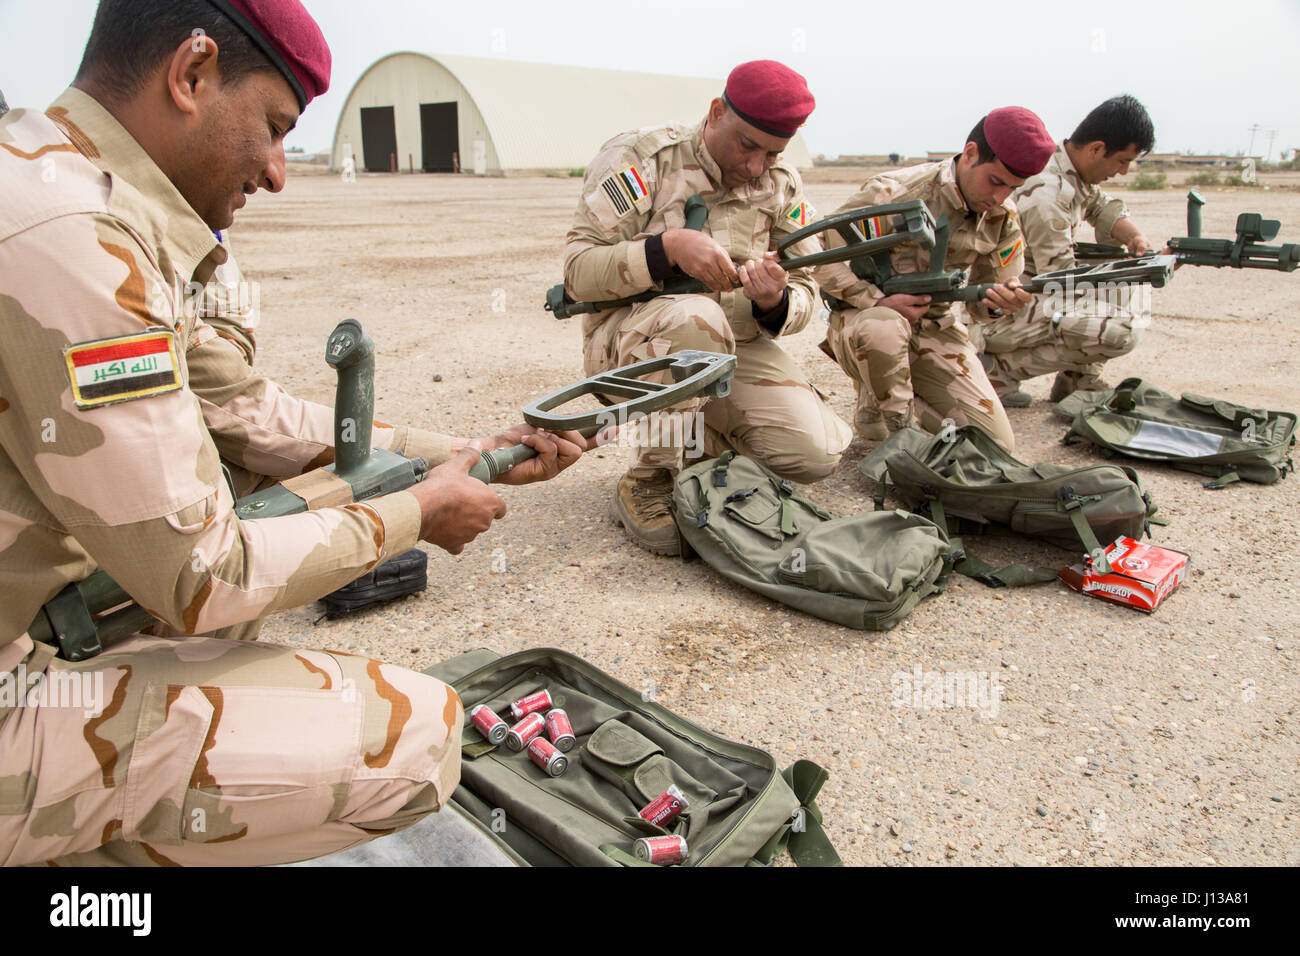 Iraqi security forces soldiers assemble mine detectors during counter improvised explosive device training provided by British army trainers deployed in support of Combined Joint Task Force – Operation Inherent Resolve at Camp Taji, Iraq, April 12, 2017. This training is part of the overall Combined Joint Task Force – Operation Inherent Resolve building partner capacity mission by training and improving the capability of partnered forces fighting ISIS. CJTF-OIR is the global Coalition to defeat ISIS in Iraq and Syria.  (U.S. Army photo by Spc. Christopher Brecht) Stock Photo